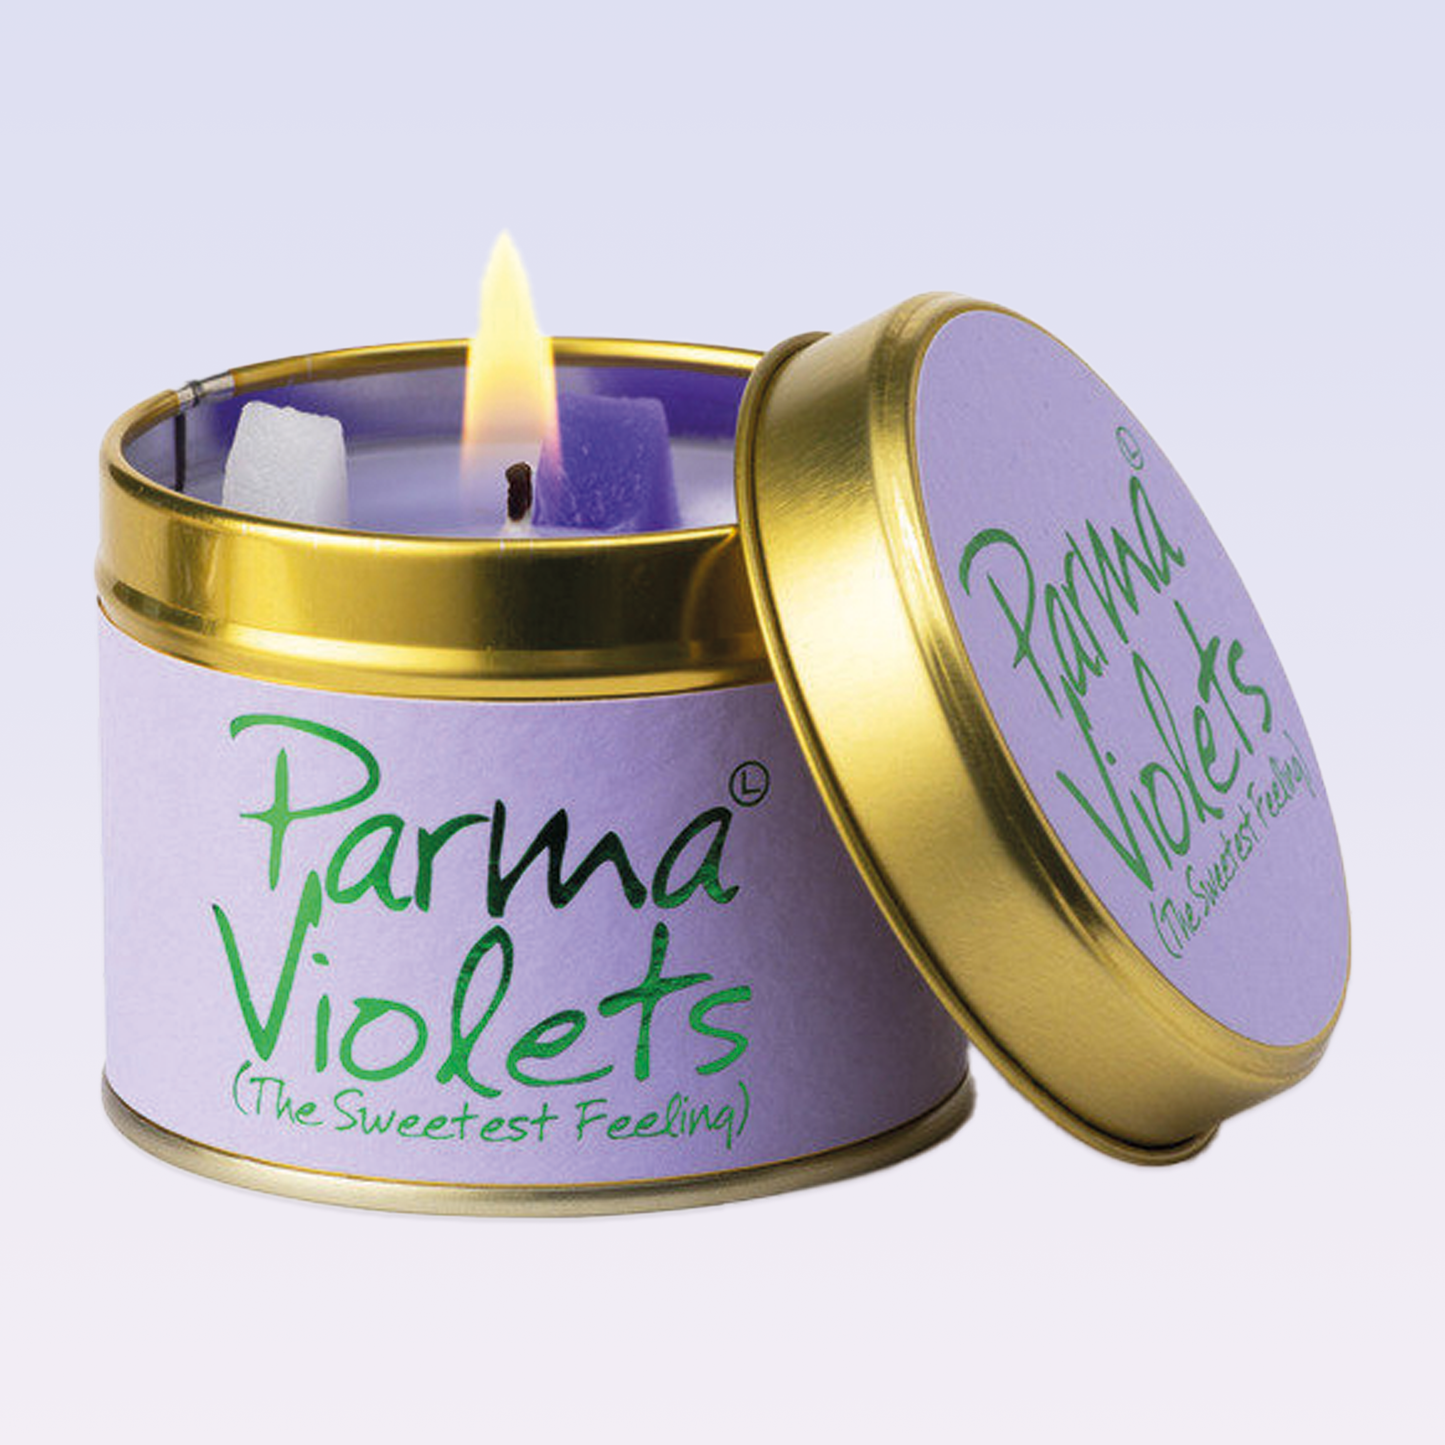 Lily-Flame Parma Violets Scented Candle